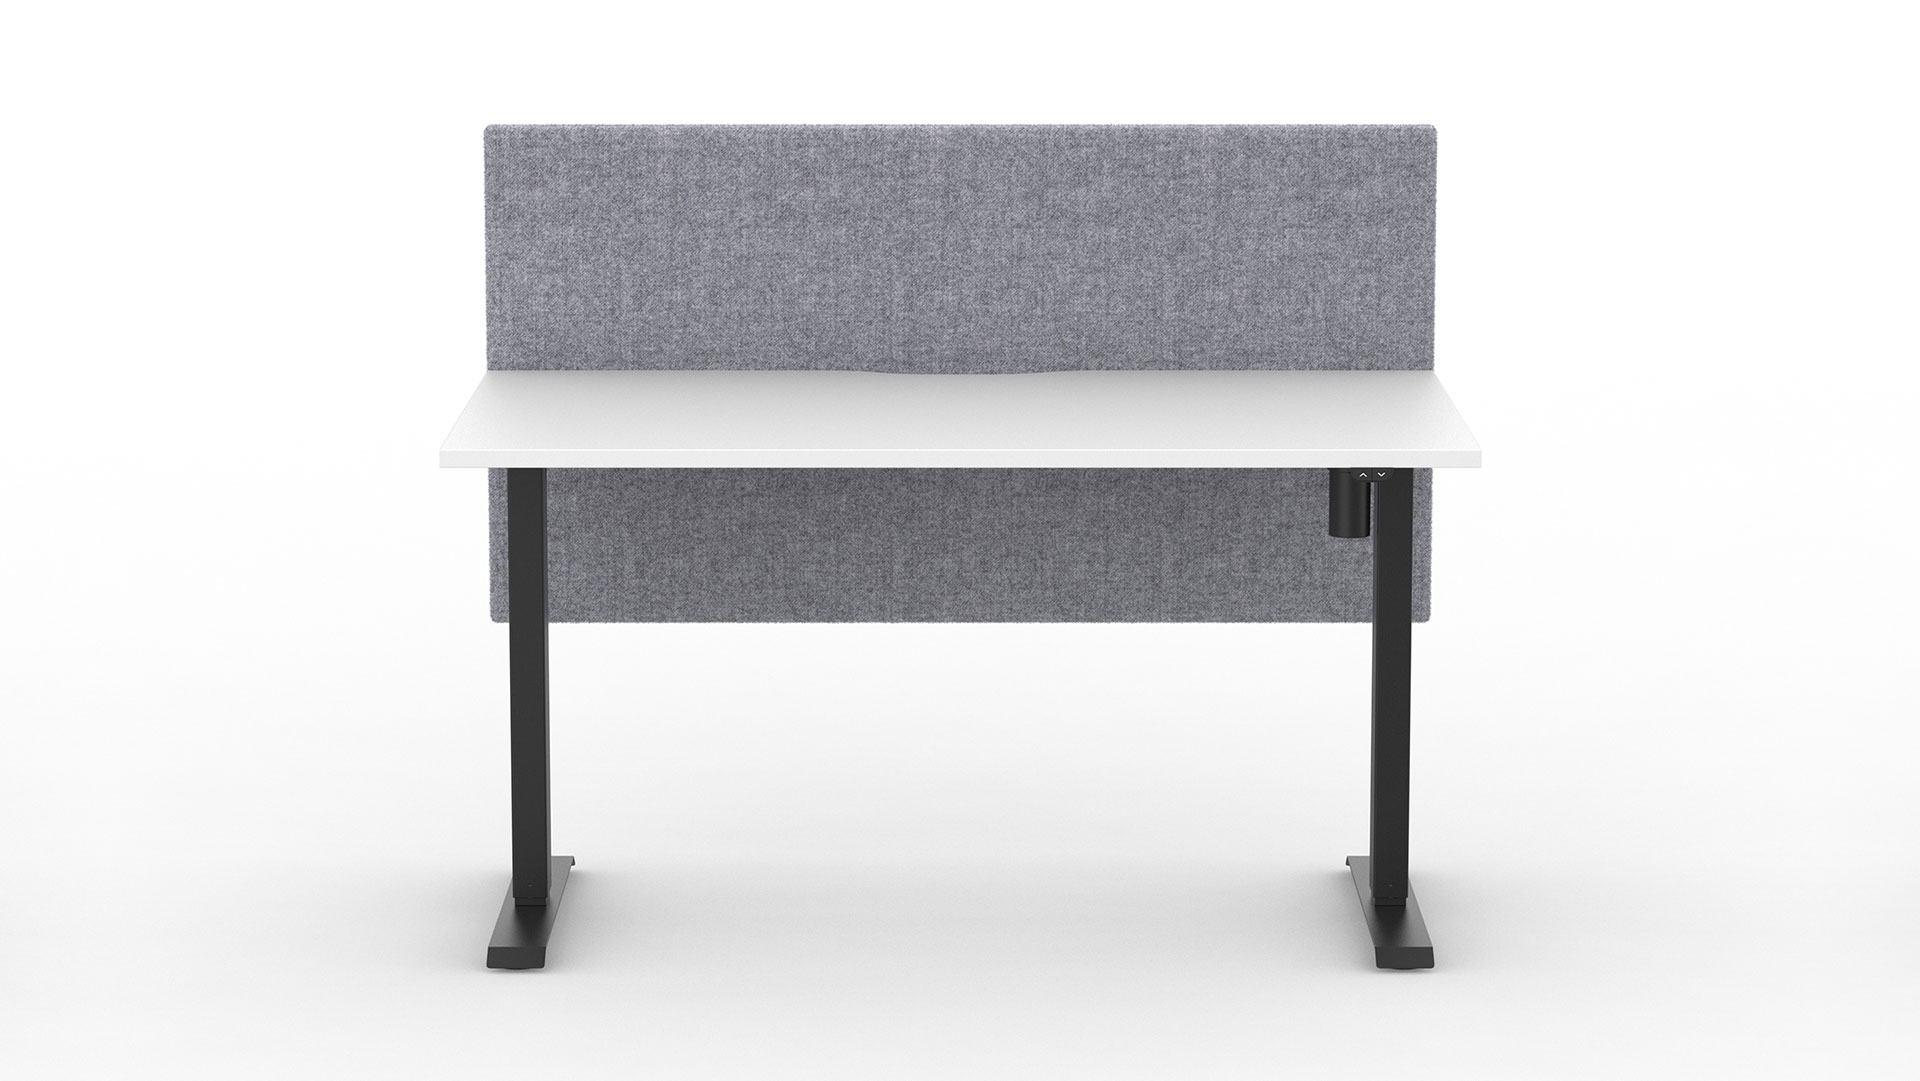 Fabric desk divider screens help to reduce background noise.